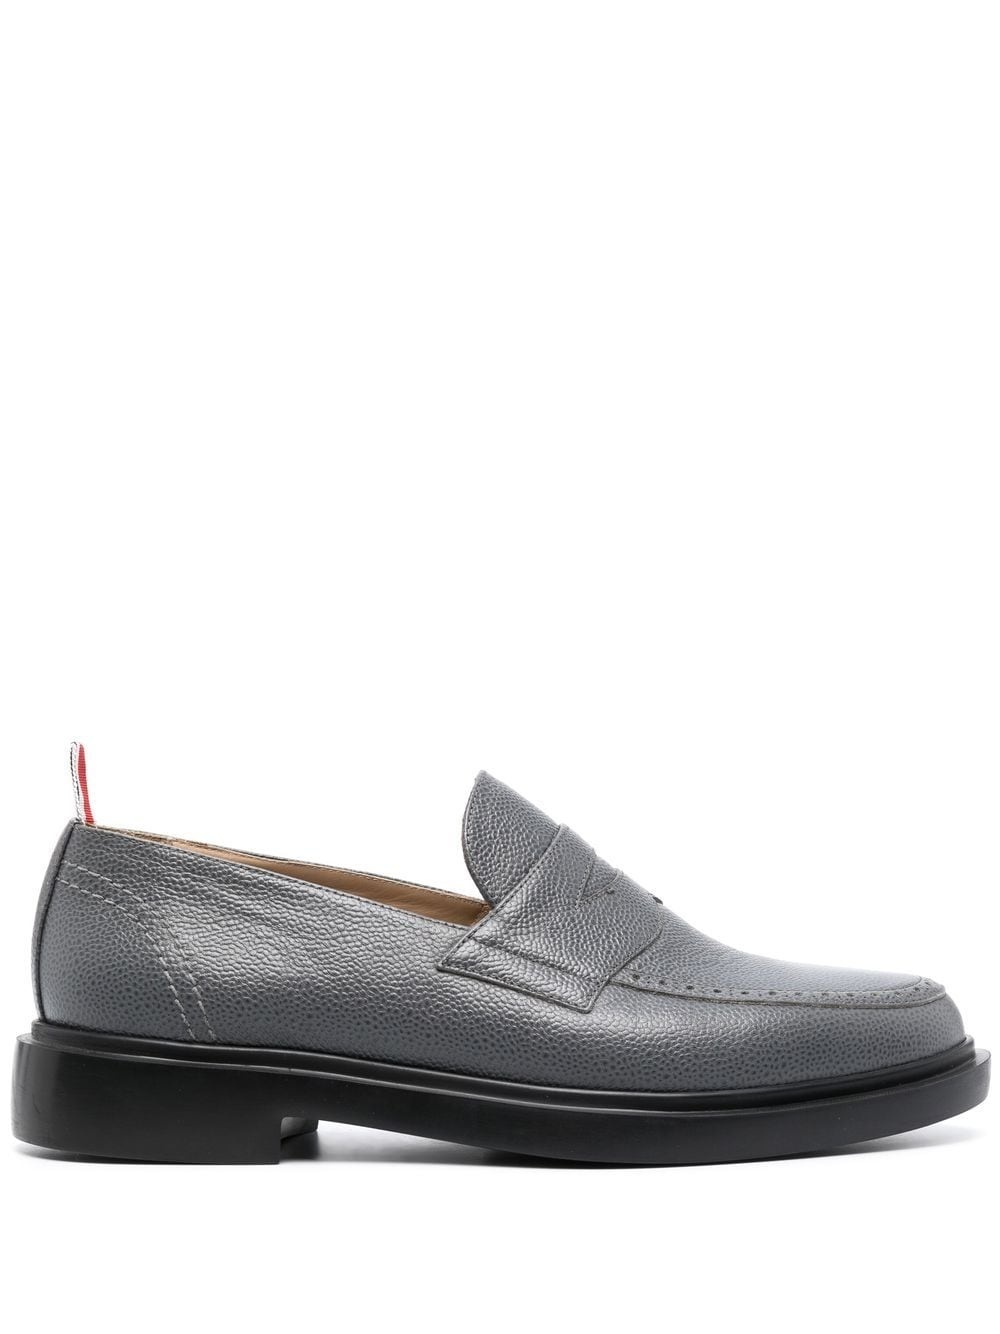 classic penny leather loafers - 1